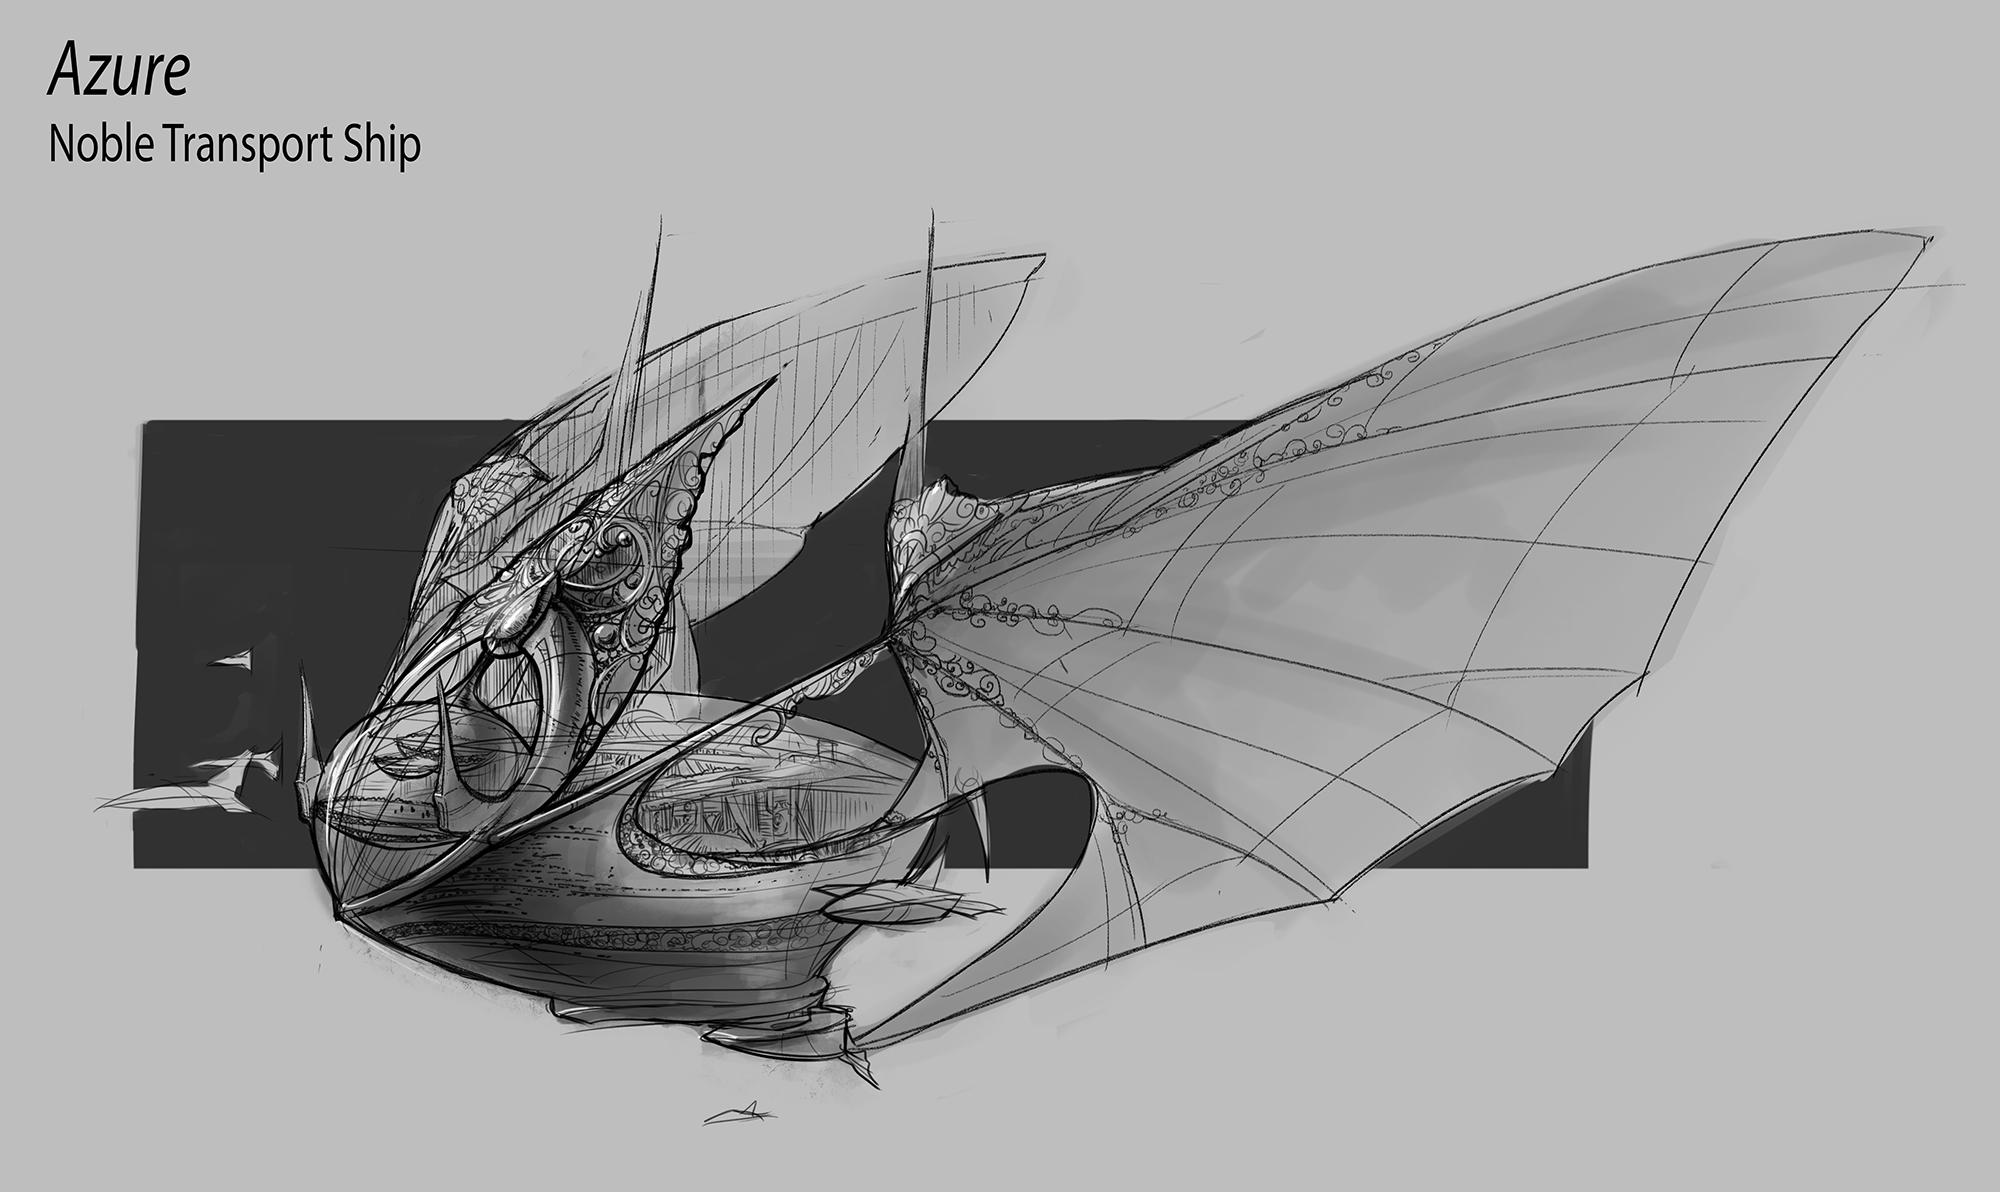 Black and white sketch of ornate spaceship. Filigree details line the body of the ship and the wings